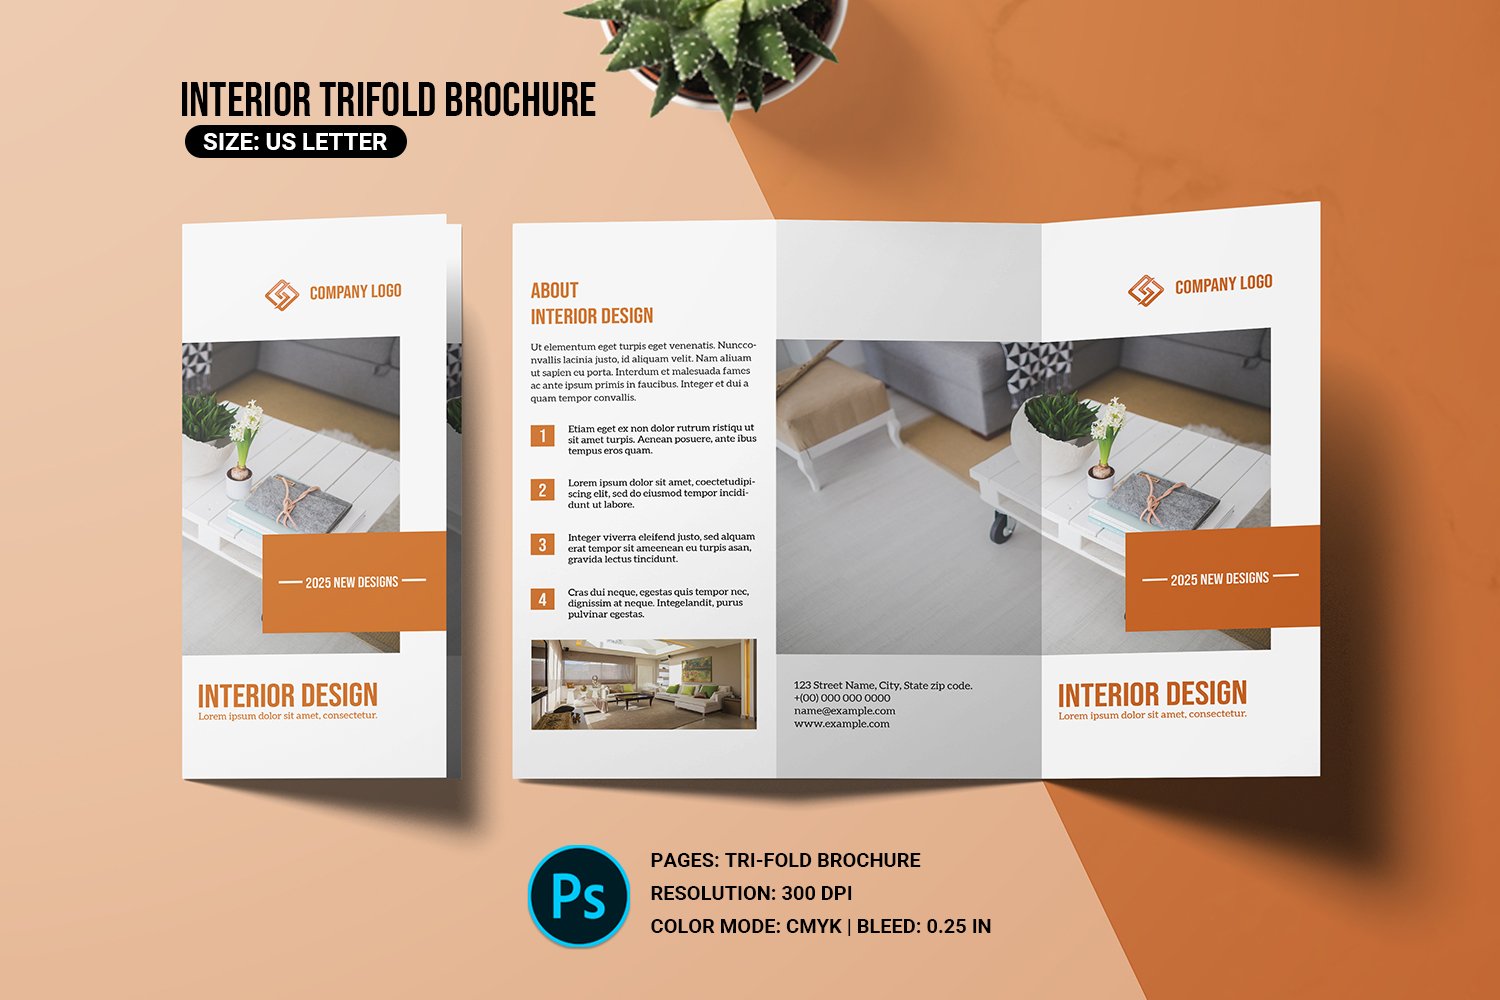 Trifold Interior Brochure cover image.